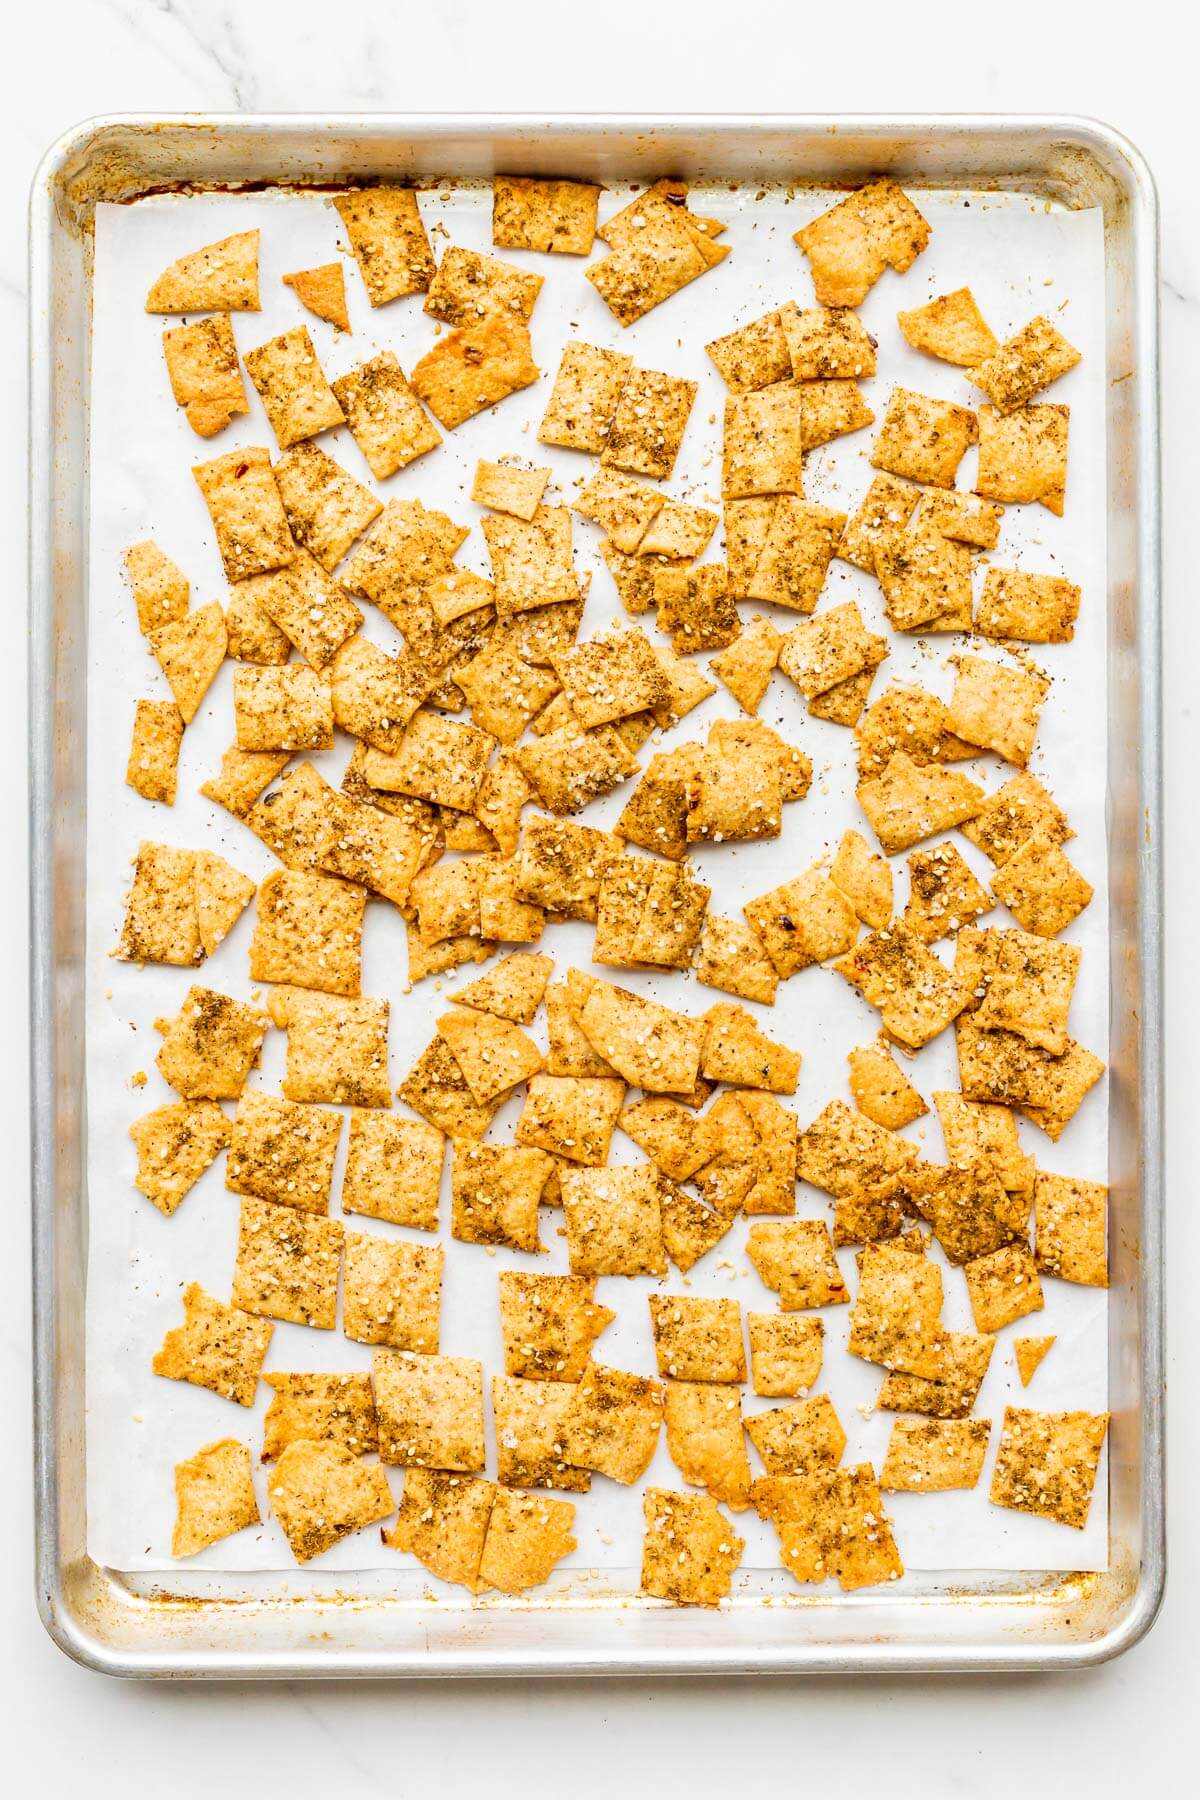 A sheet pan of golden brown baked crackers topped with salt, spices and sesame seeds.